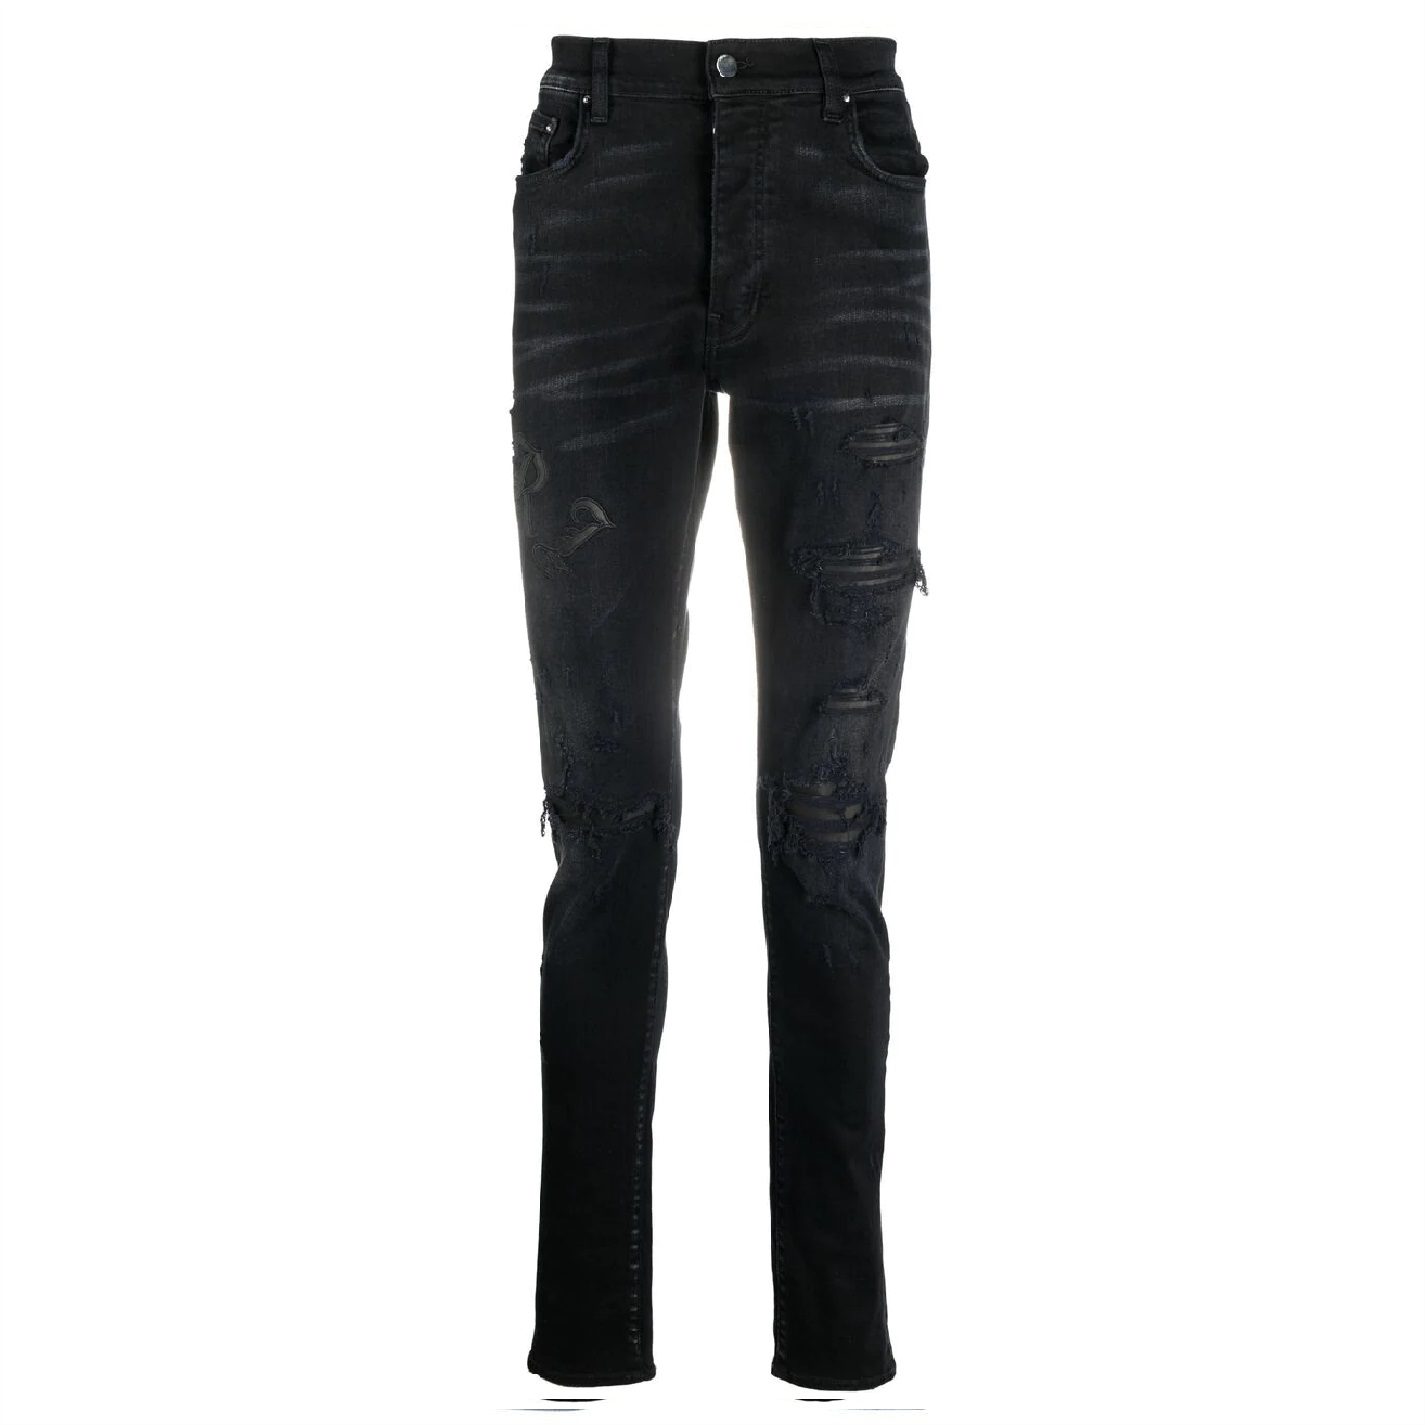 AMIRI OLD ENGLISH GOTHIC LOGO JEANS - Clothes Rep